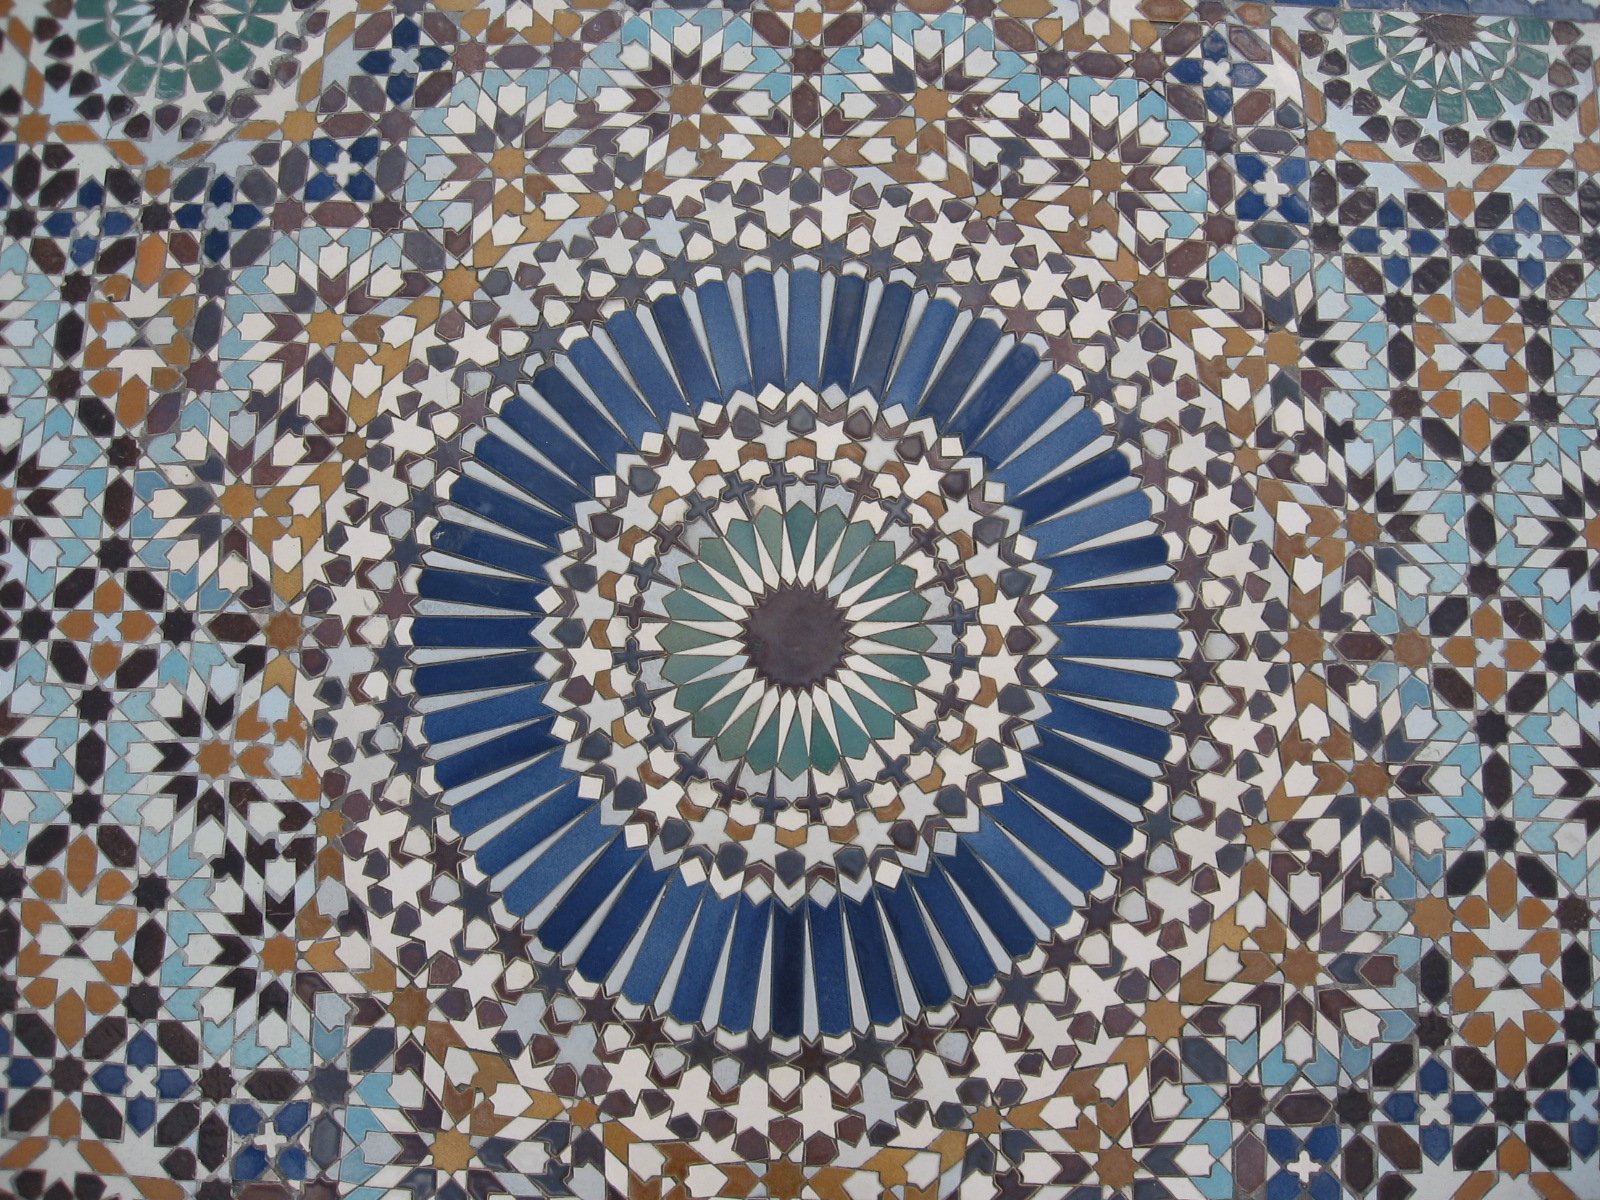 mosaics in a mosque by shockresistant7 1 - Image Thread